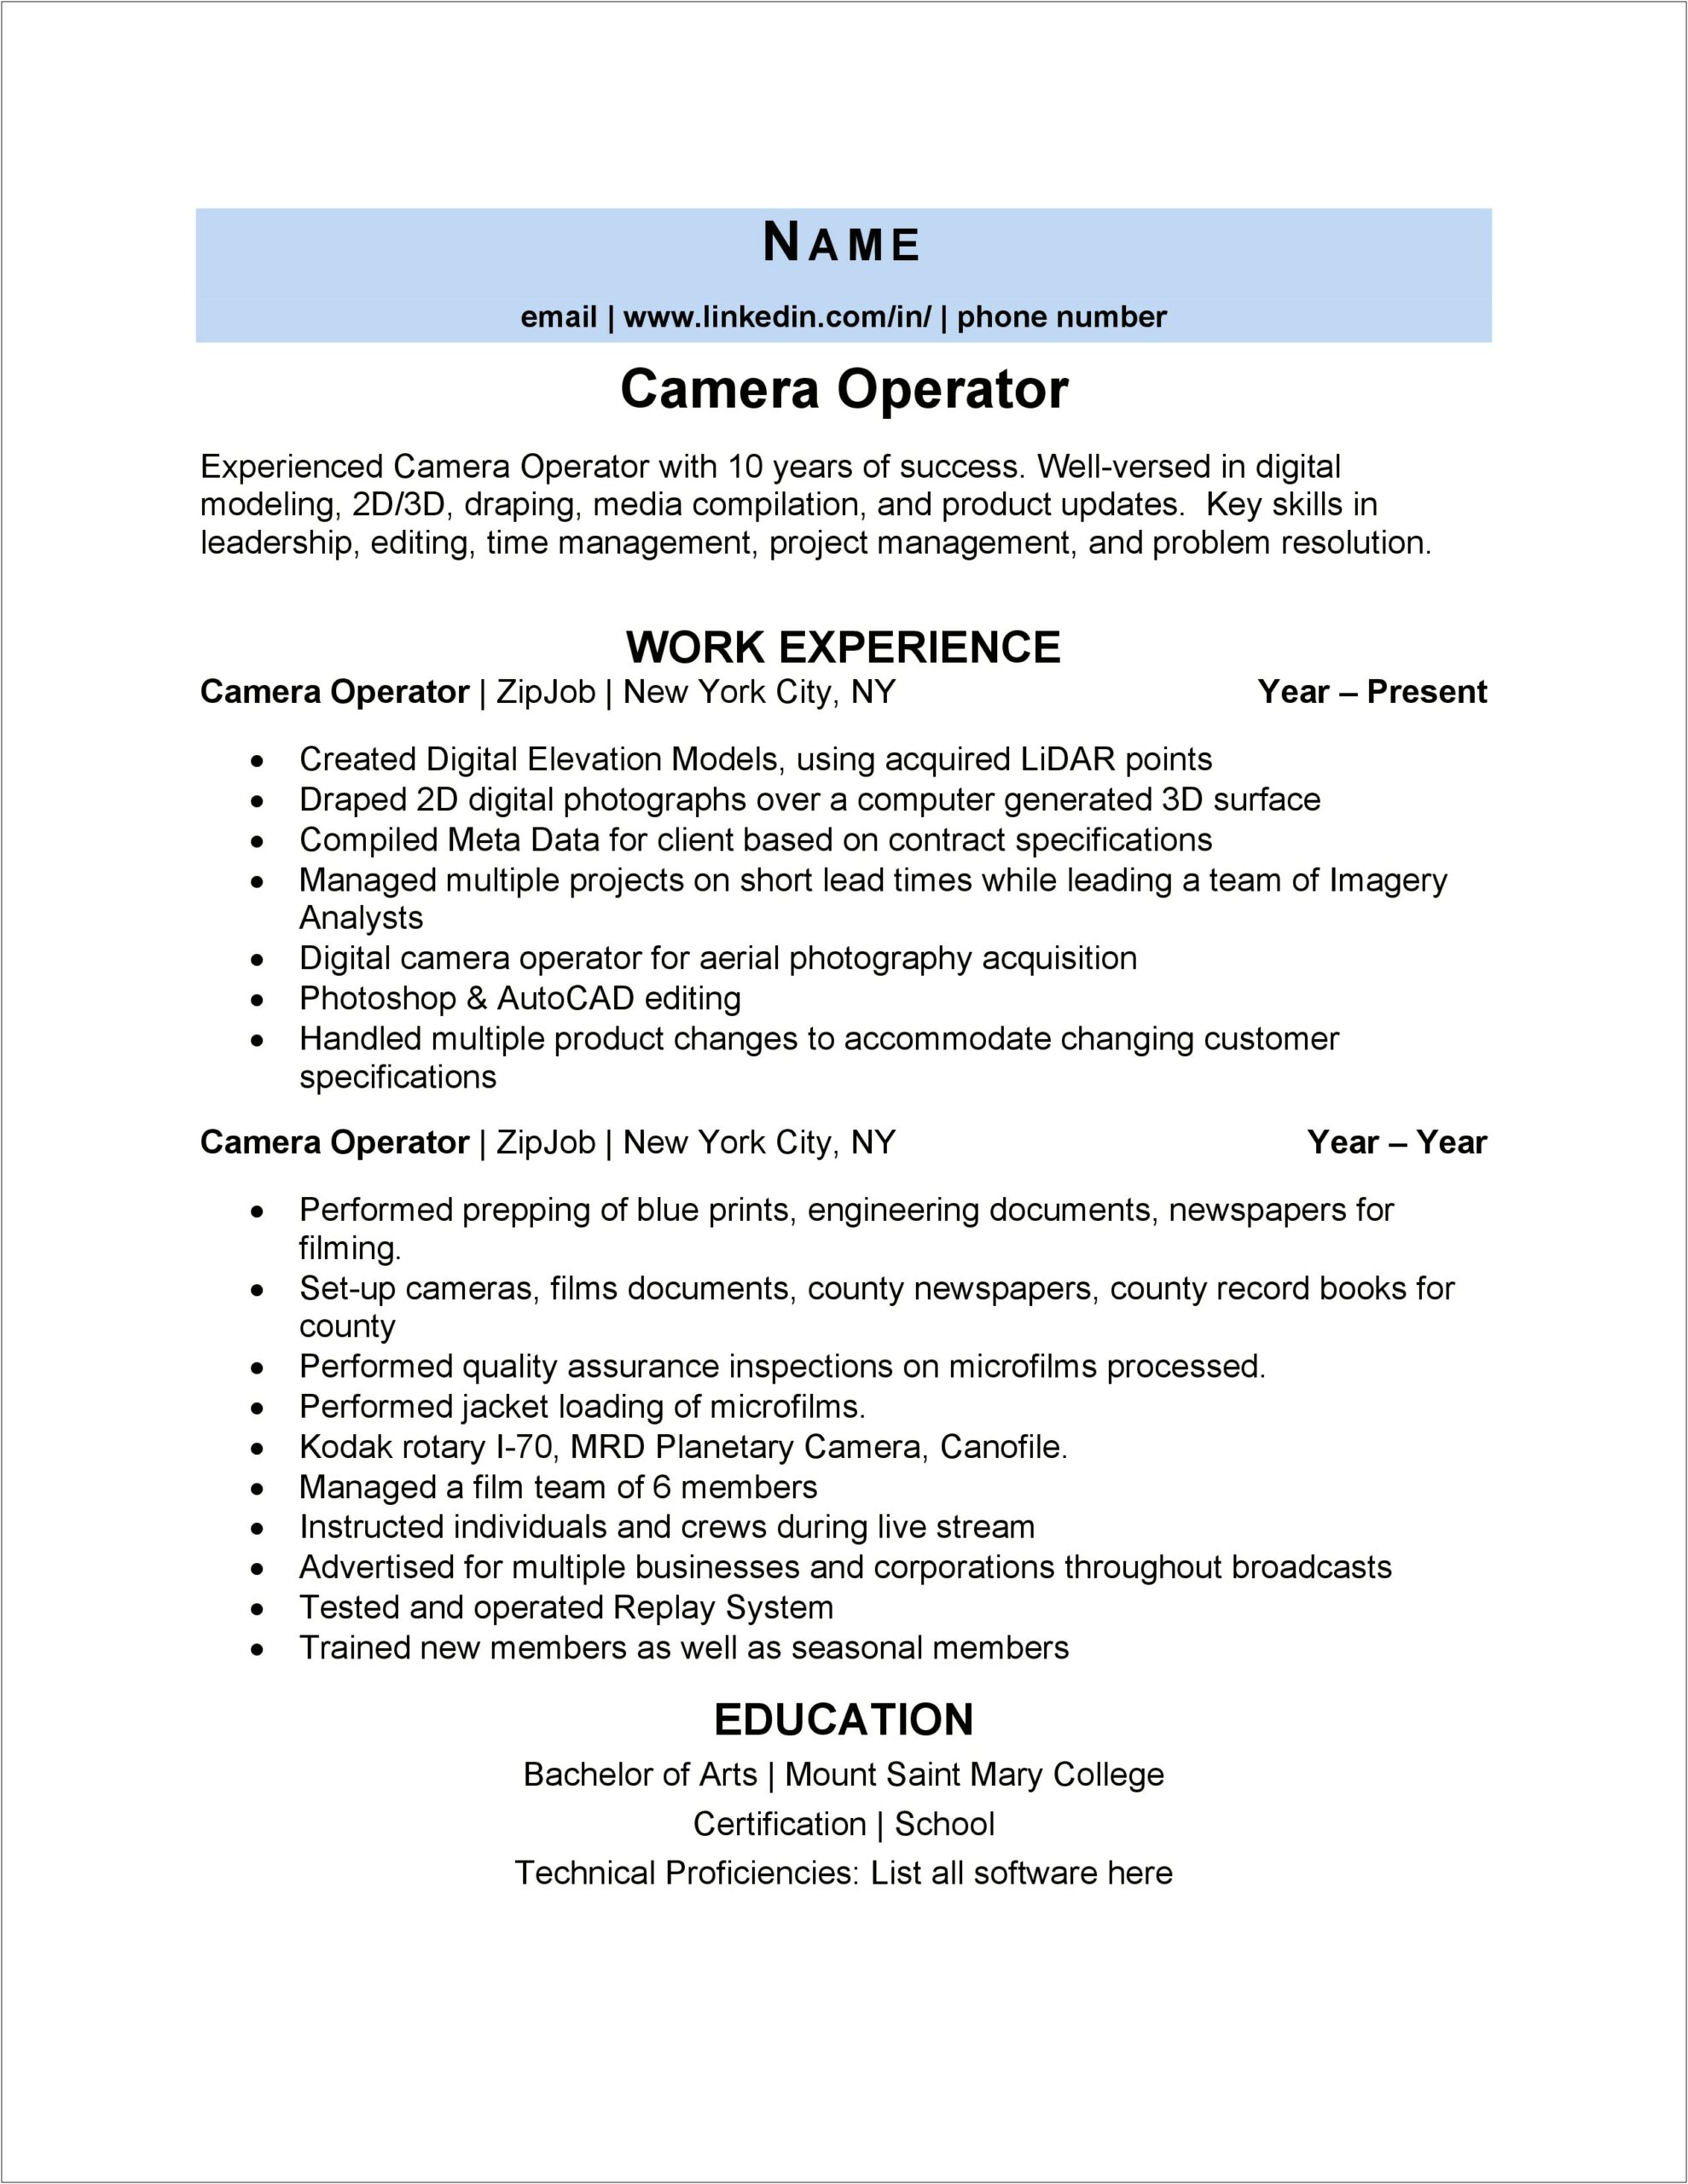 Resume Skill Examples For Photographers